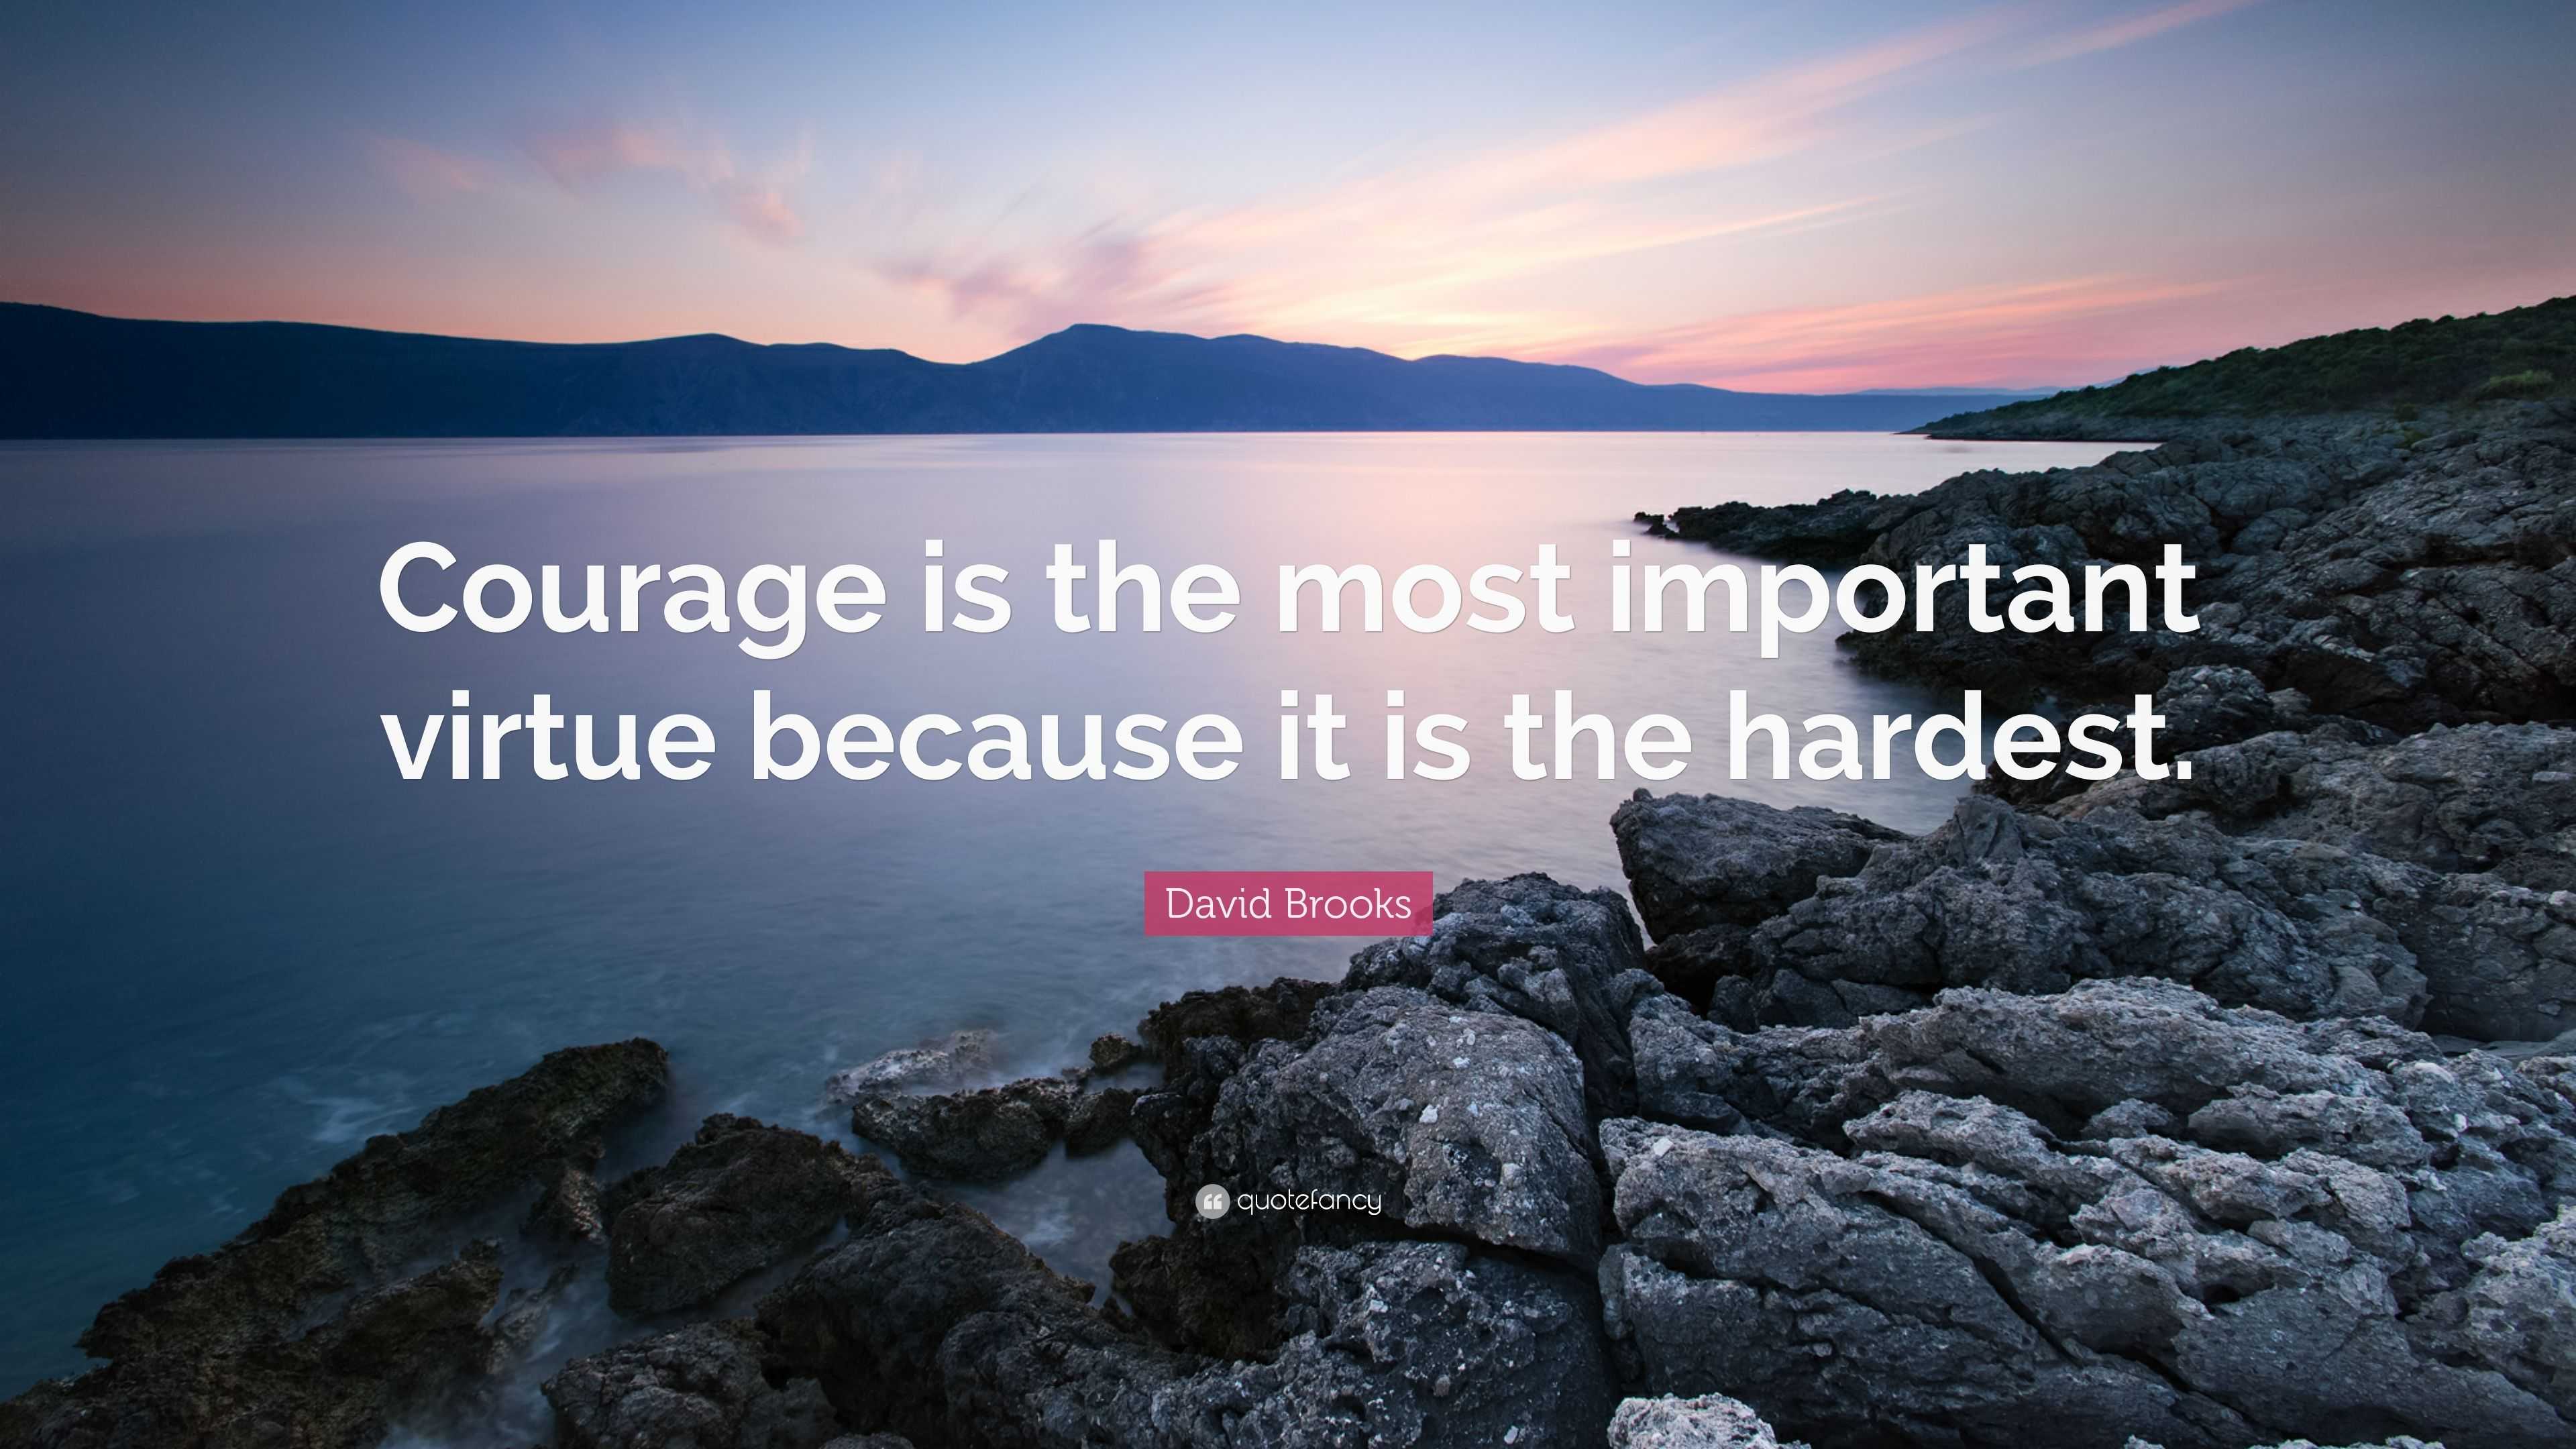 David Brooks Quote: “Courage is the most important virtue because it is ...